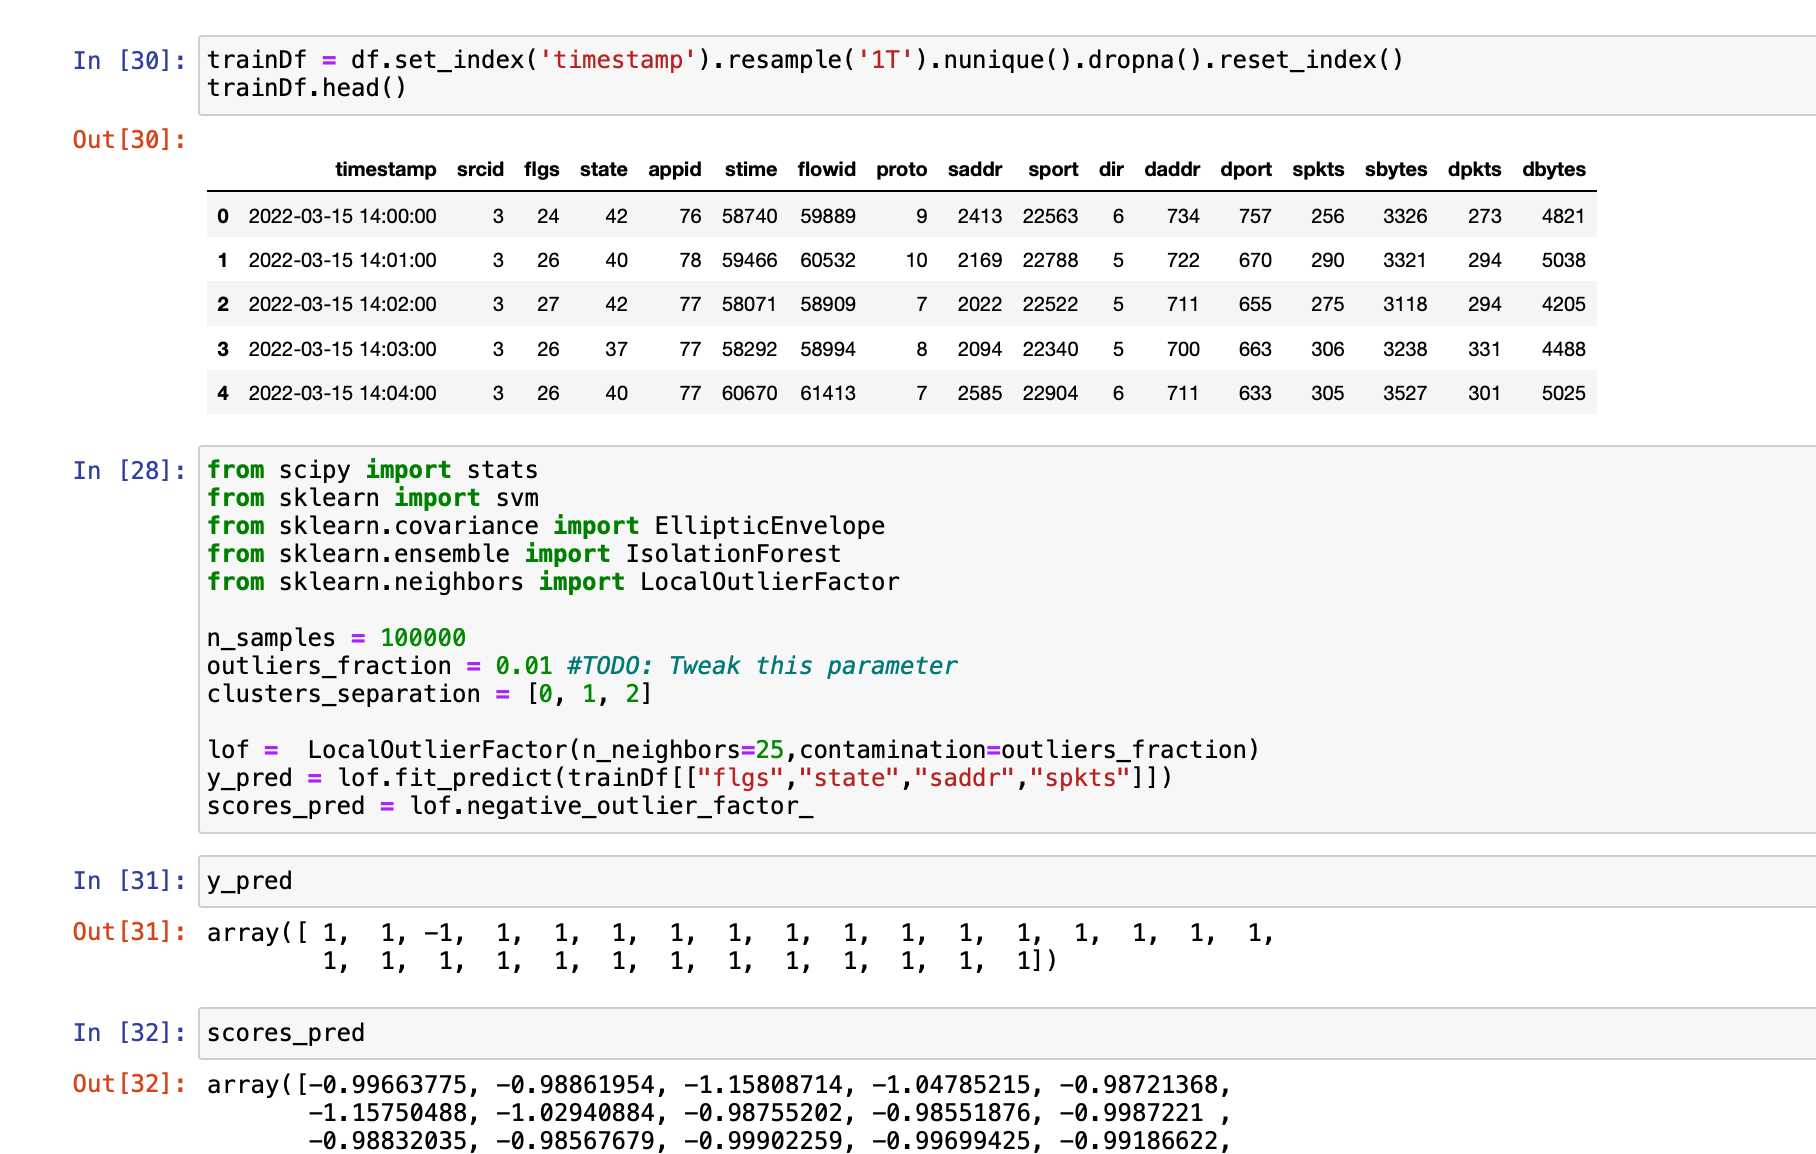 Running ML tooling via Jupyter notebooks to detect outliers